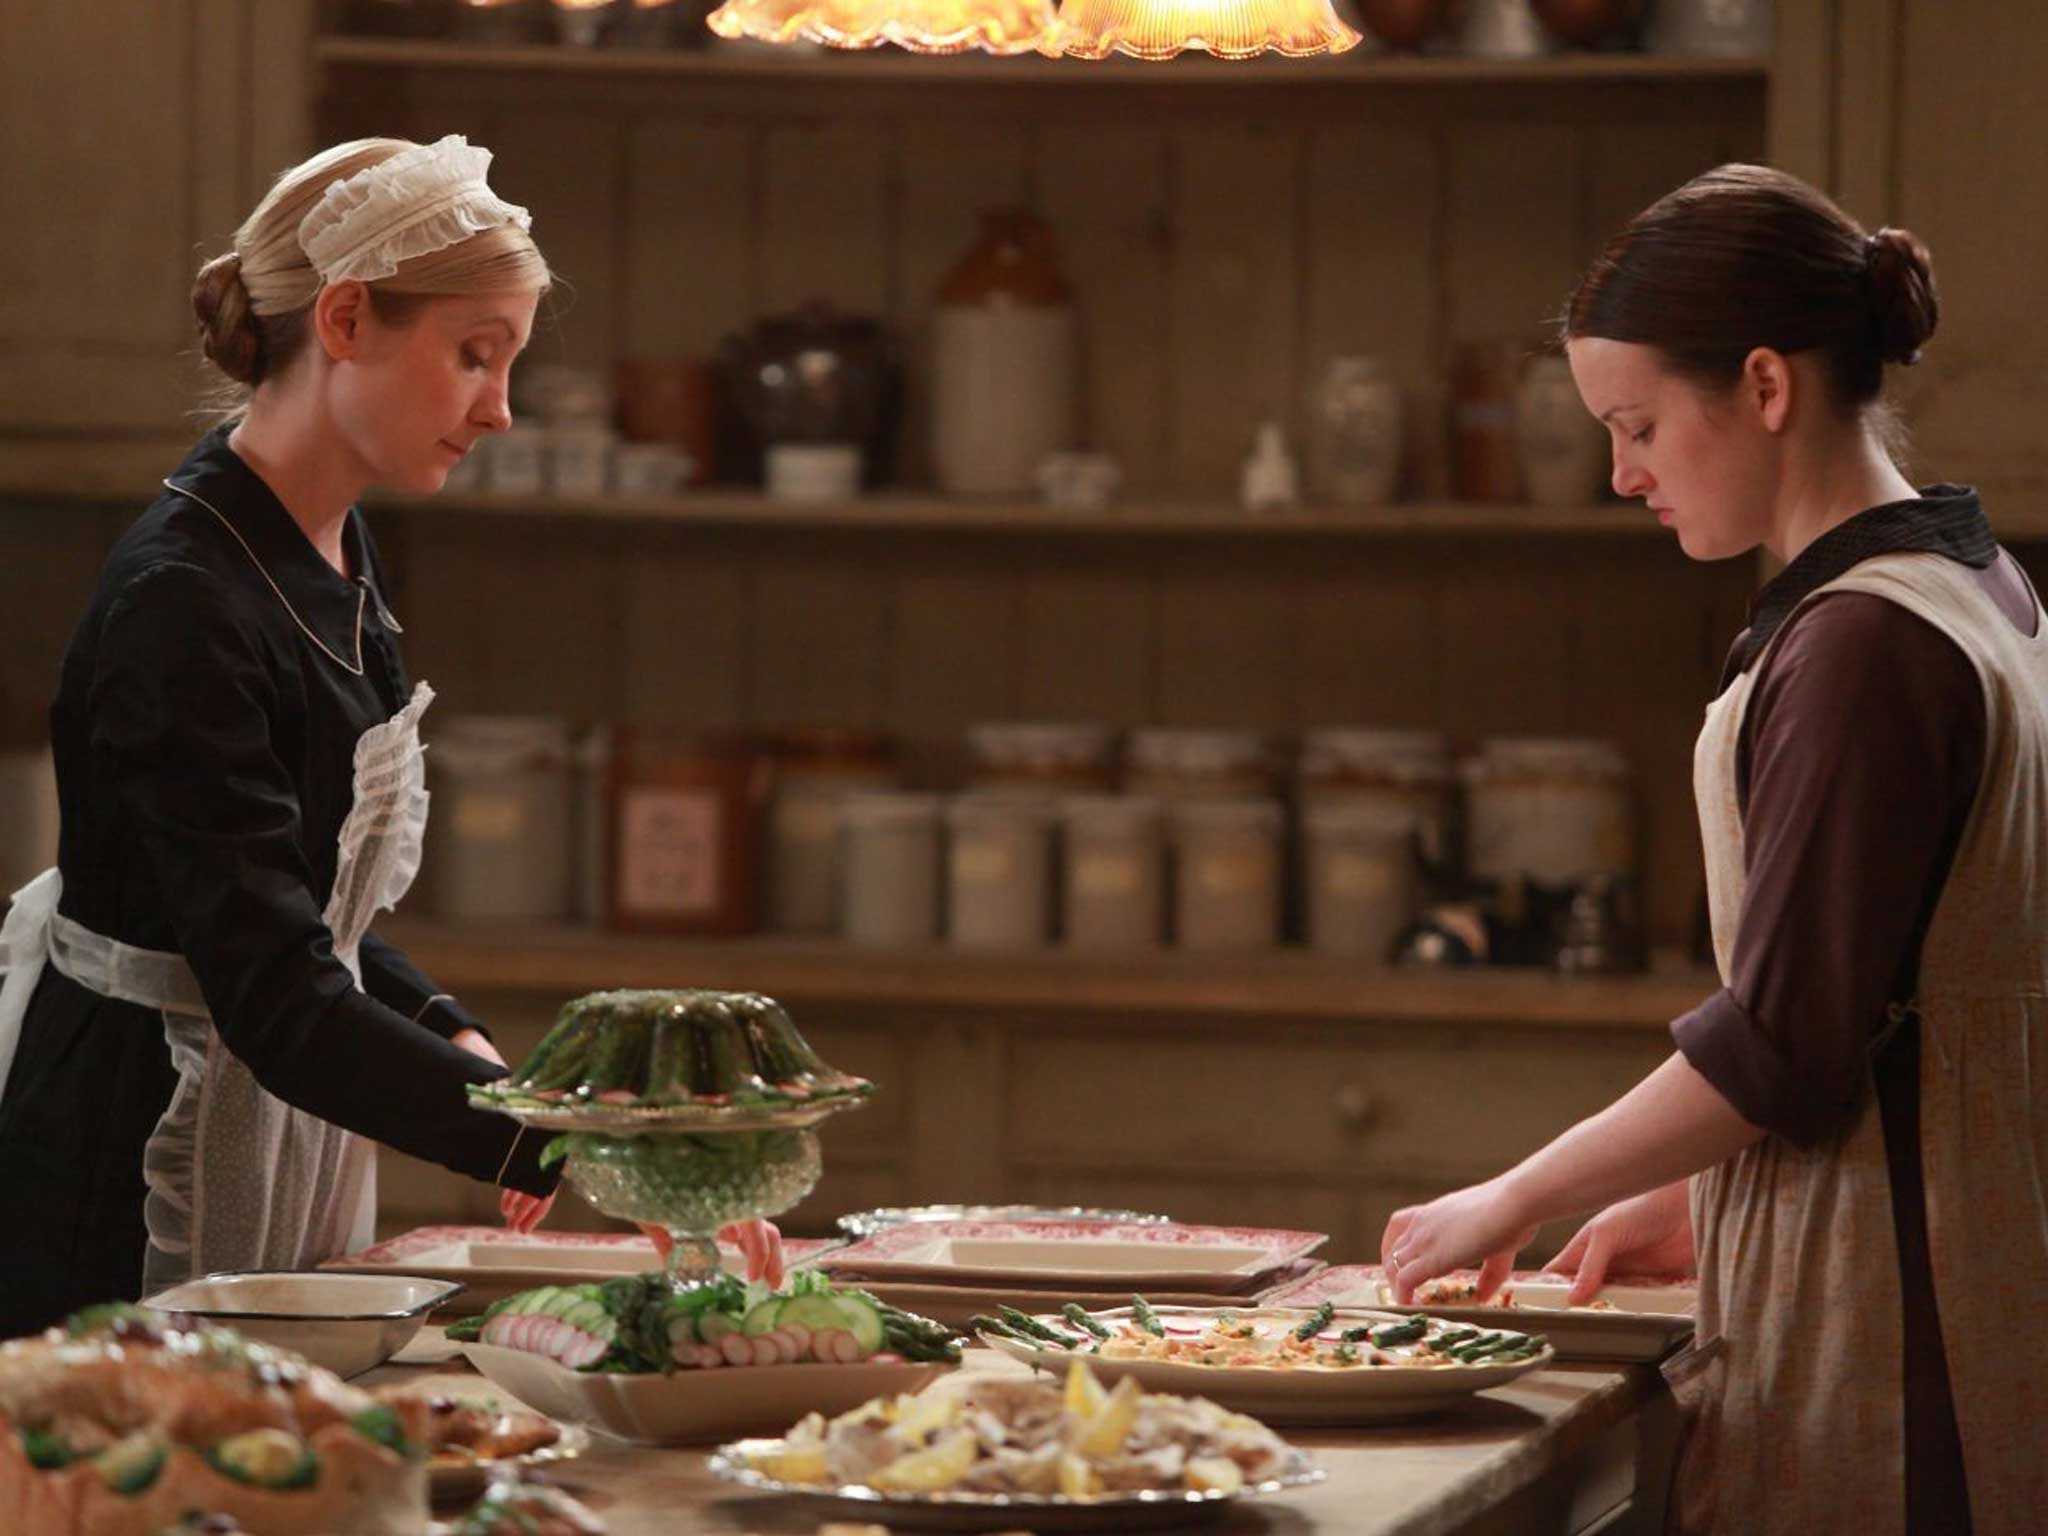 Past masters: few recipes survive from the kitchens of great houses like the one in 'Downton Abbey'